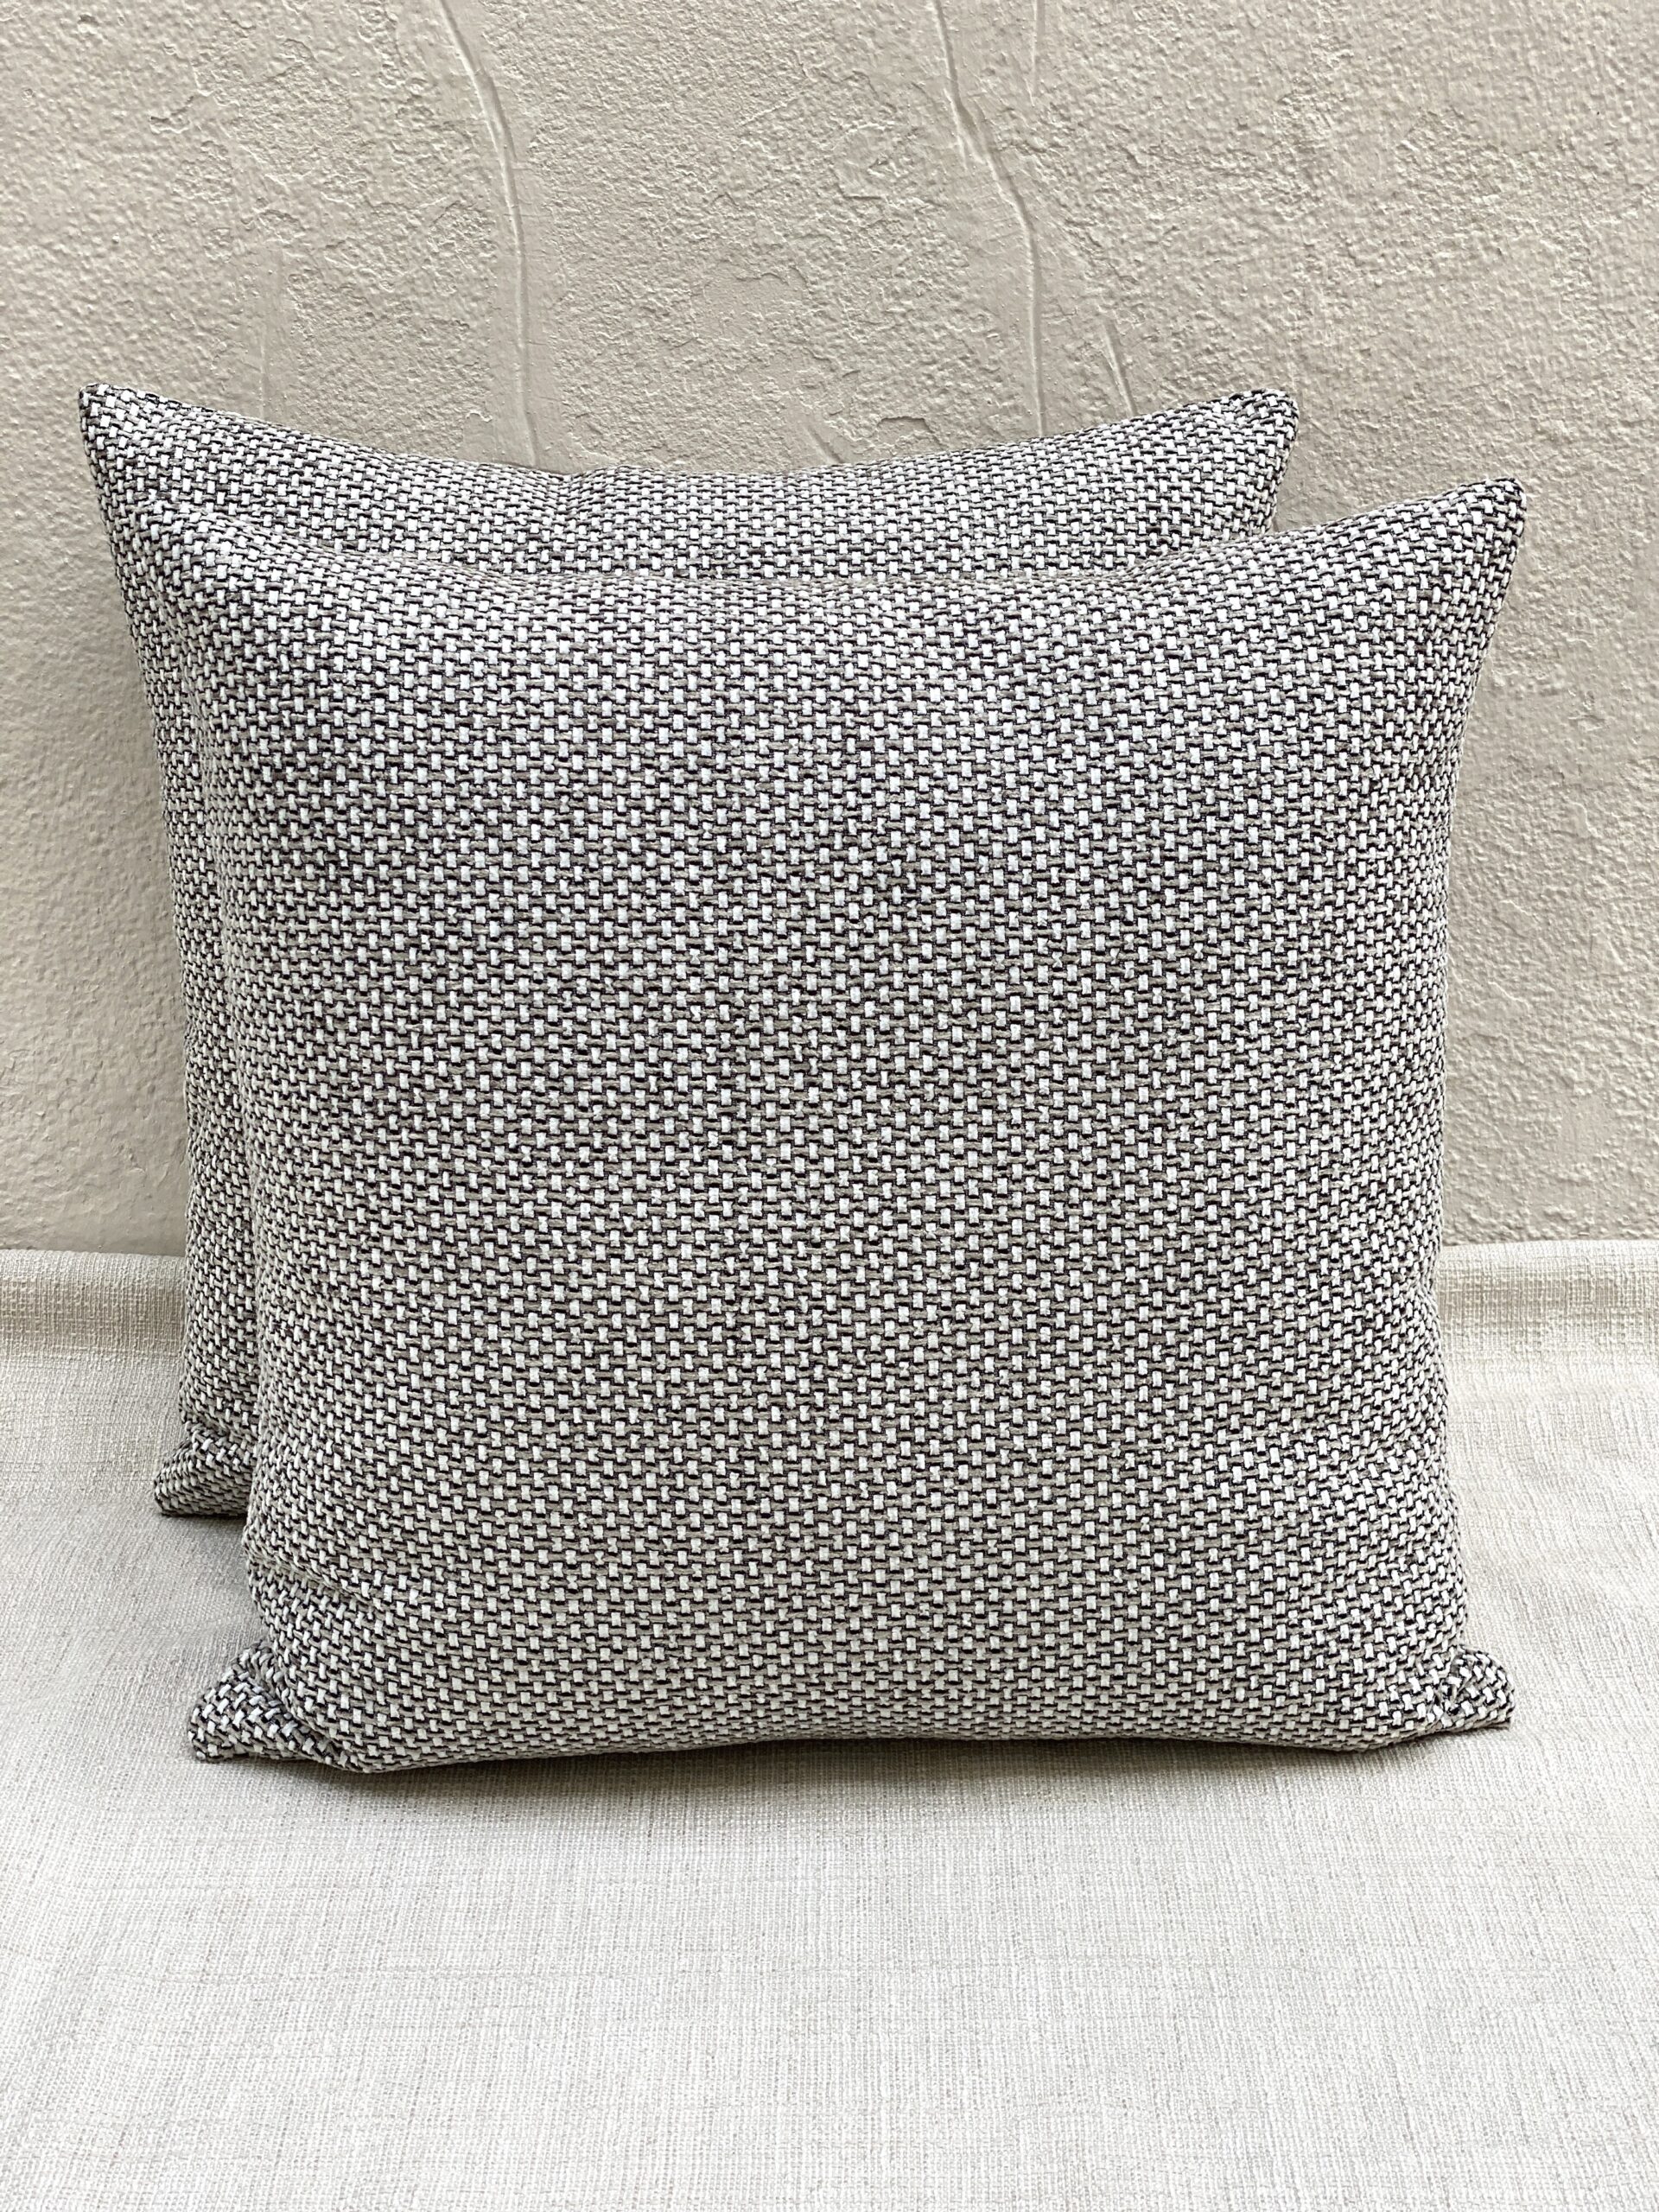 Stout Scatter Pillows